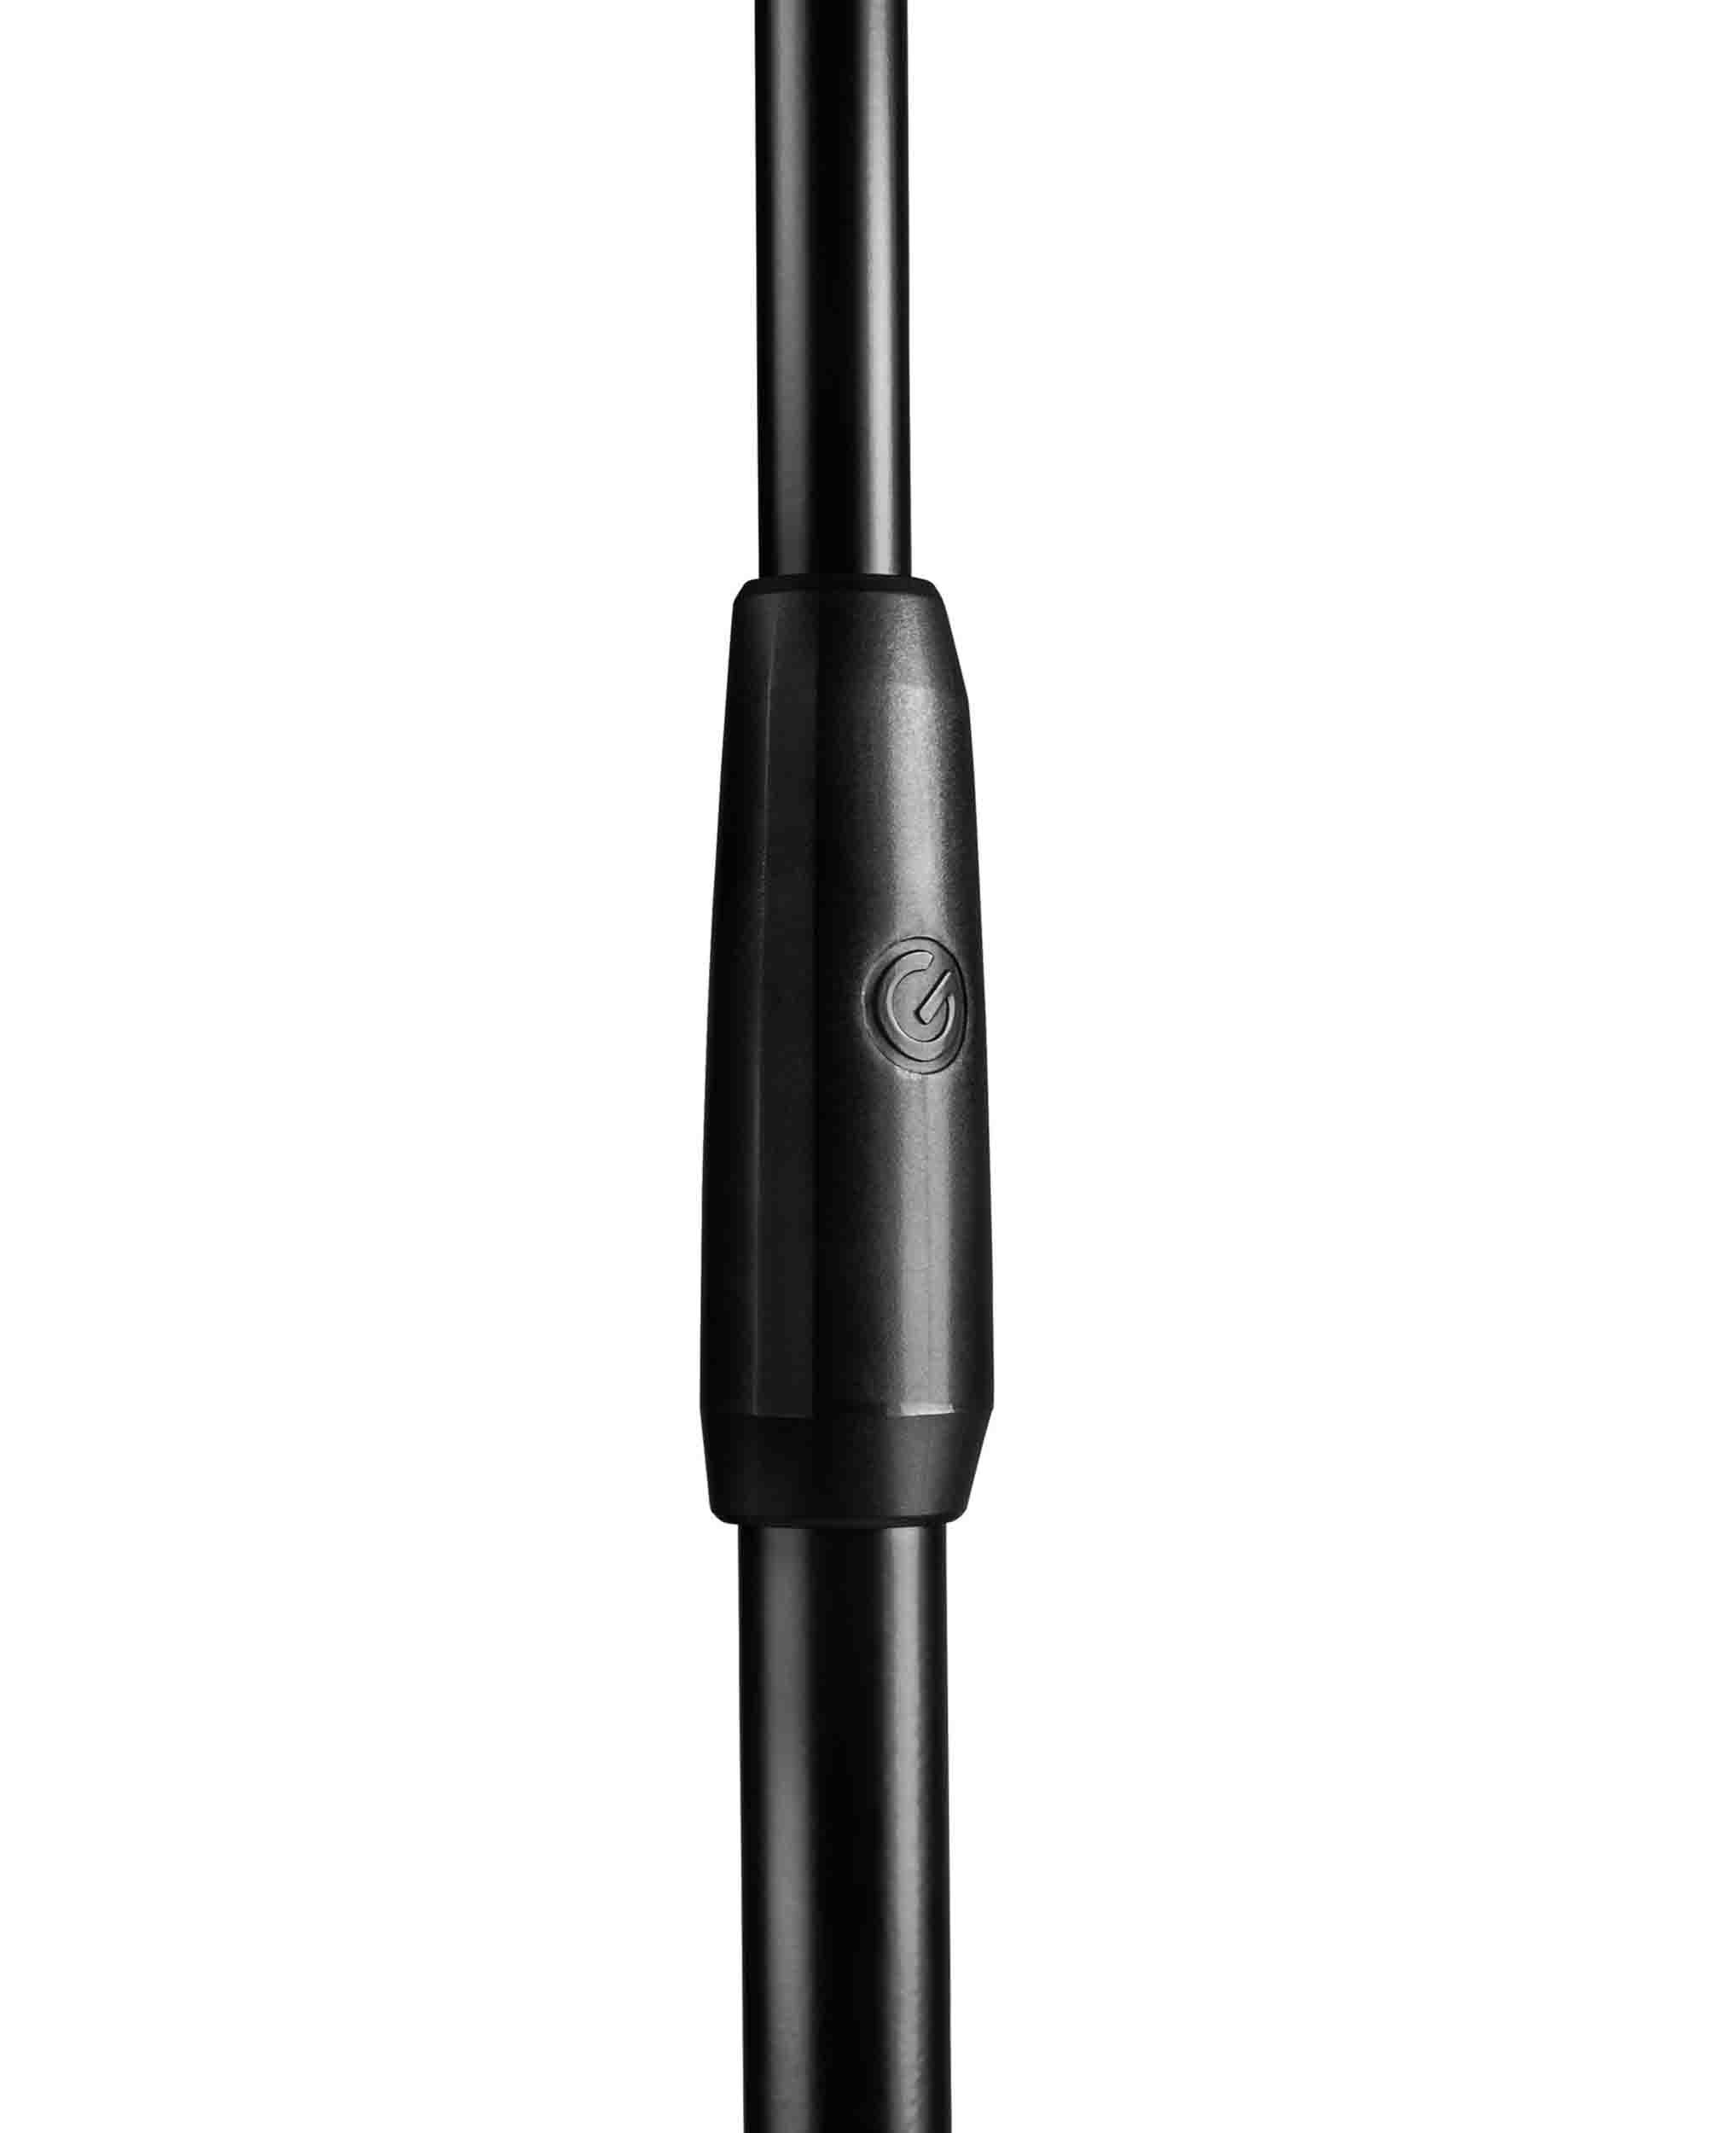 Gravity TMS 23, Touring Straight Microphone Stand with Round Base by Gravity